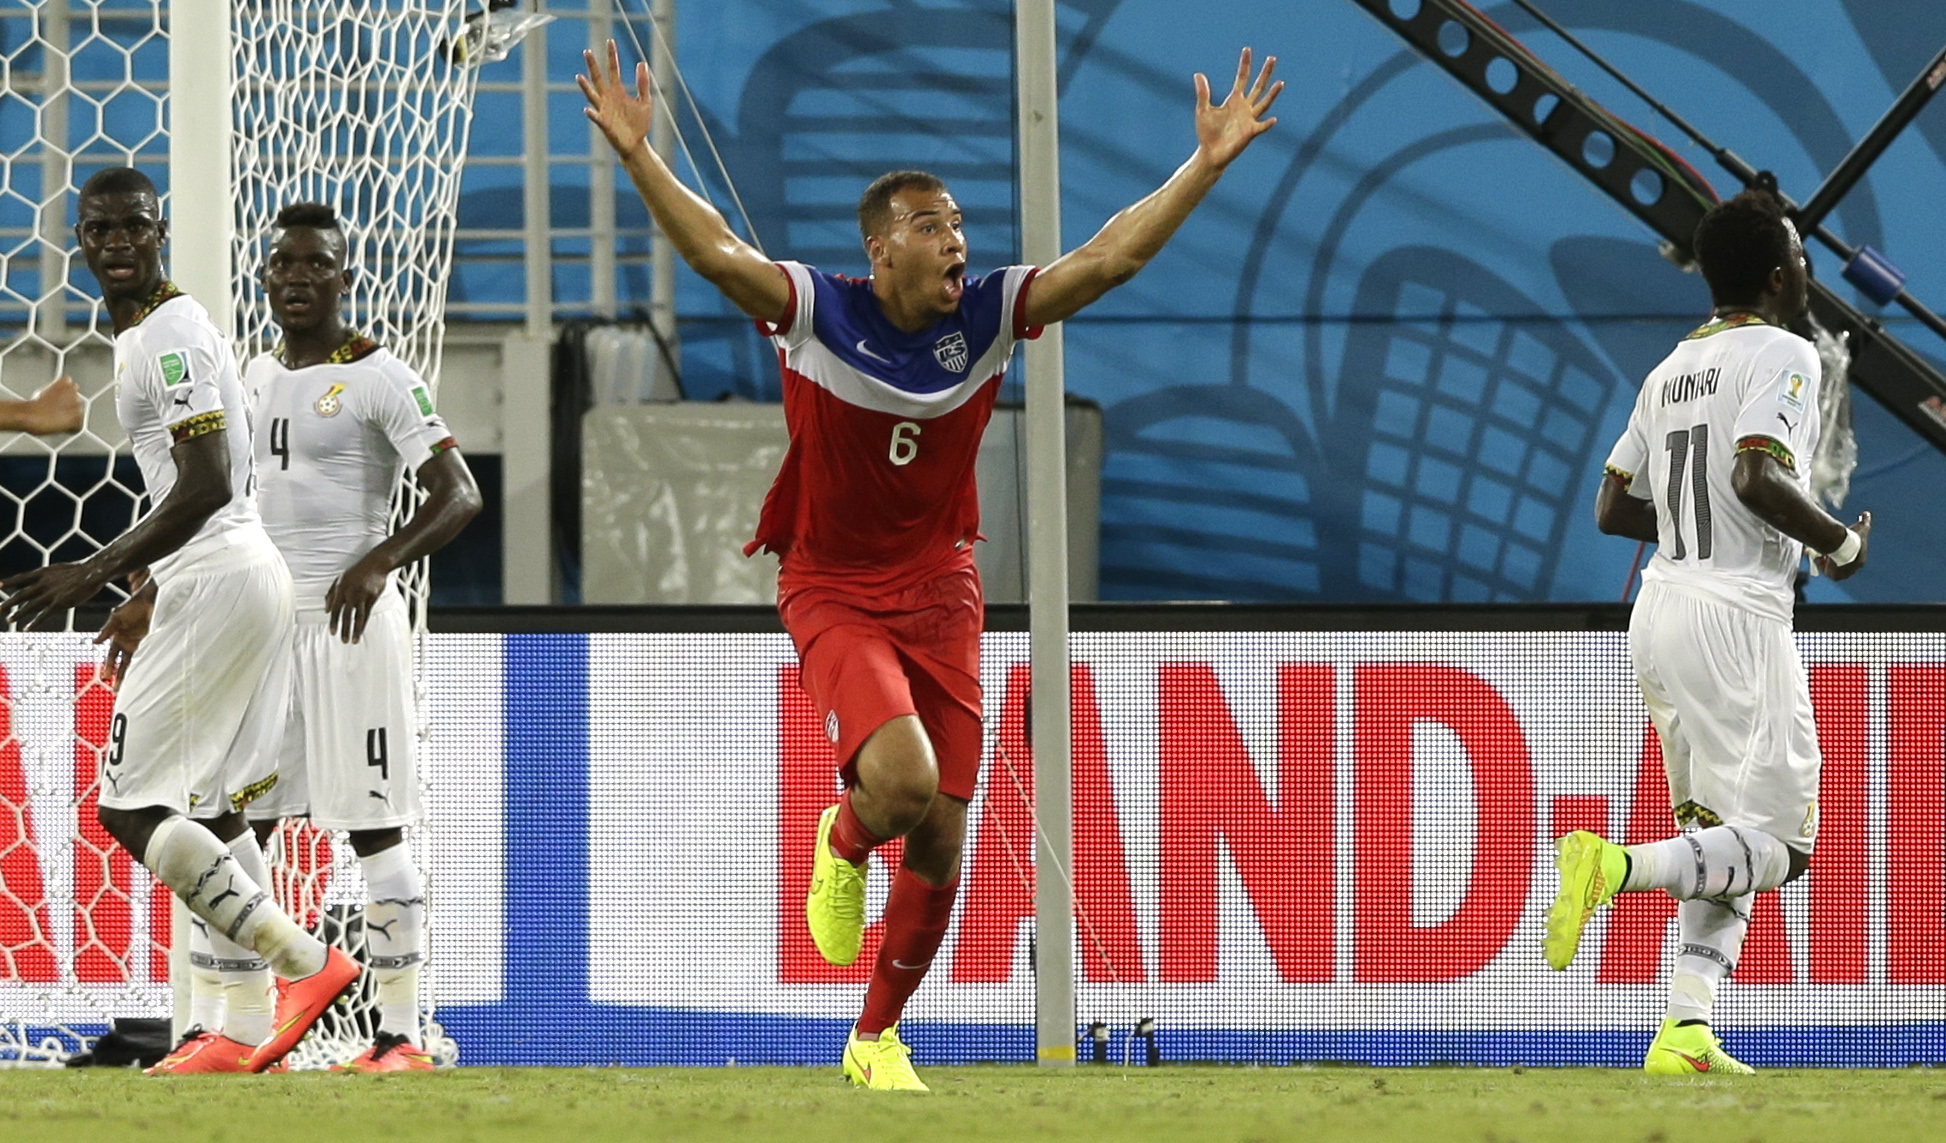 United States' John Brooks celebrates after scoring his side's second goal during the group G World Cup soccer match between Ghana and the United States at the Arena das Dunas in Natal, Brazil on June 16, 2014. (Ricardo Mazalan—AP)